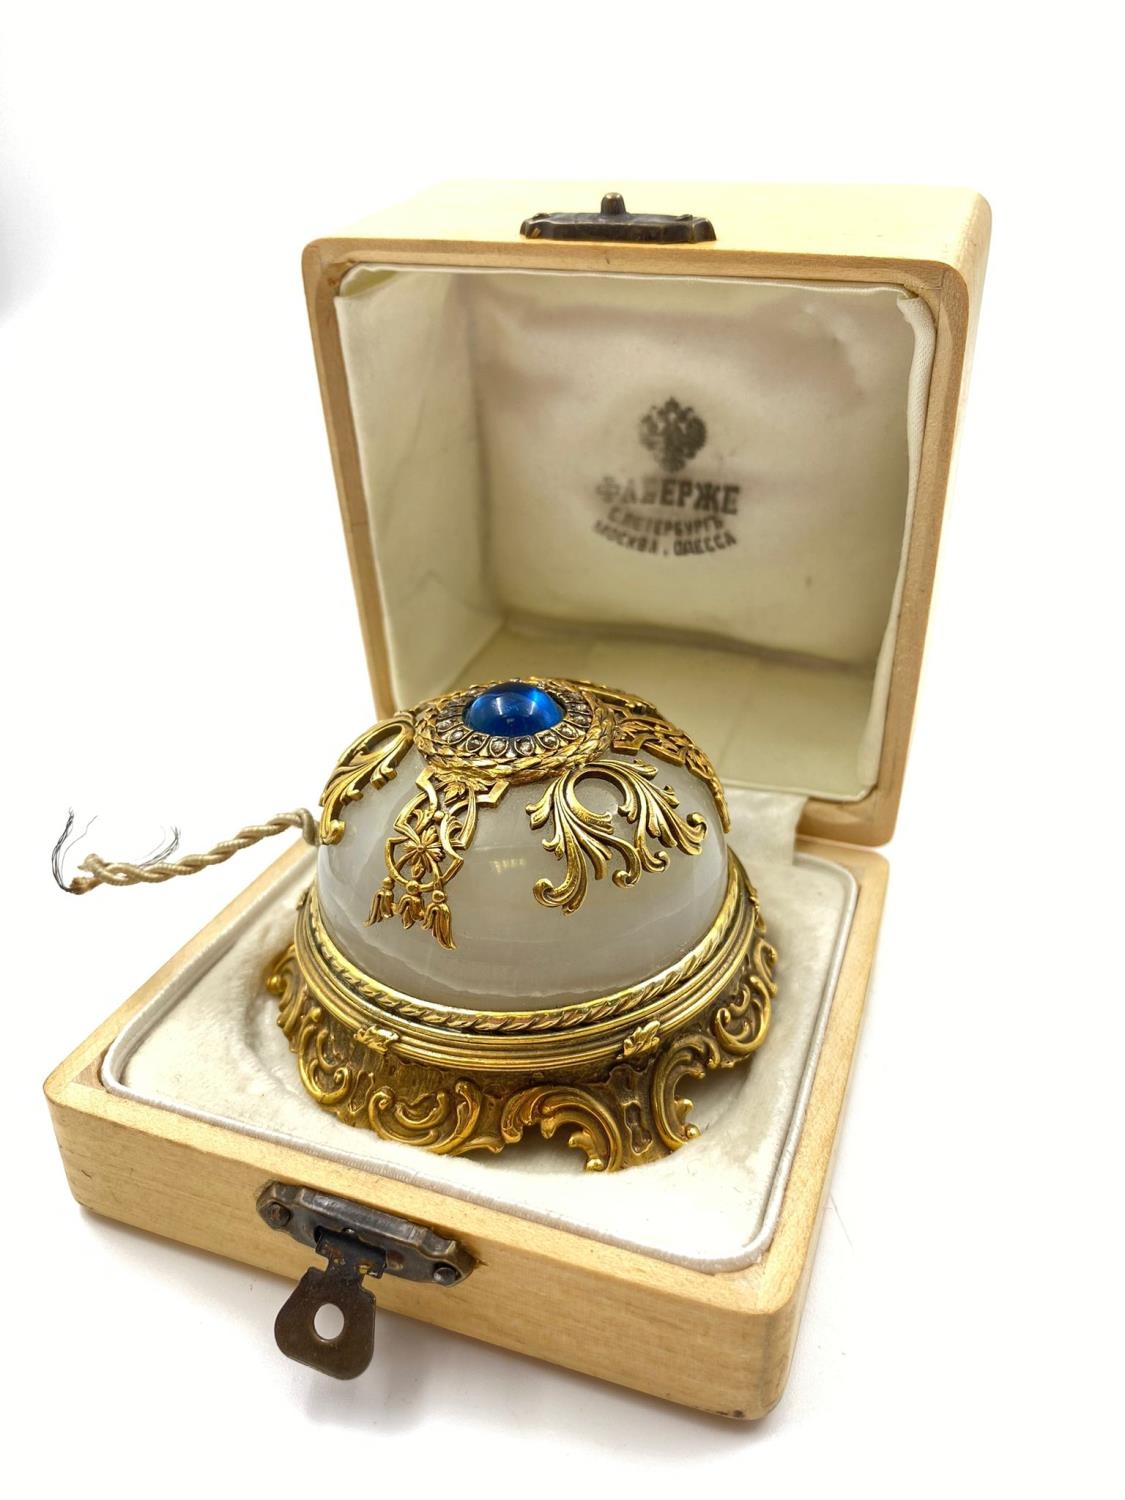 An Antique Russian Silver Gilt and Diamond Table Bell. White Onyx with a centre Sri Lankan Sapphire.